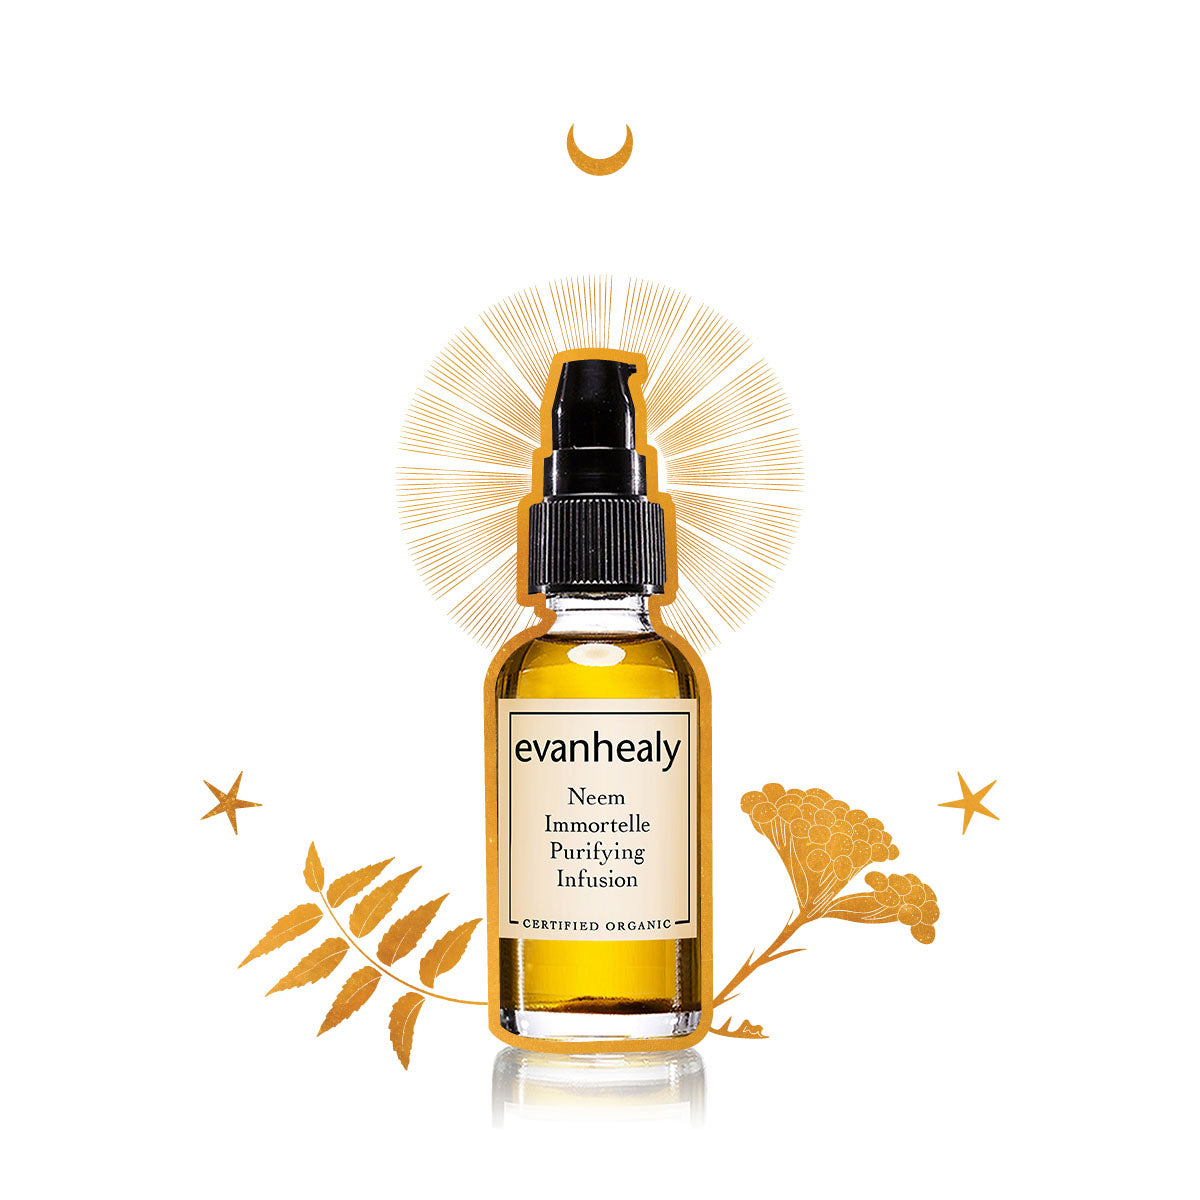 evanhealy neem immortelle purifying infusion oil serum gilded graphic